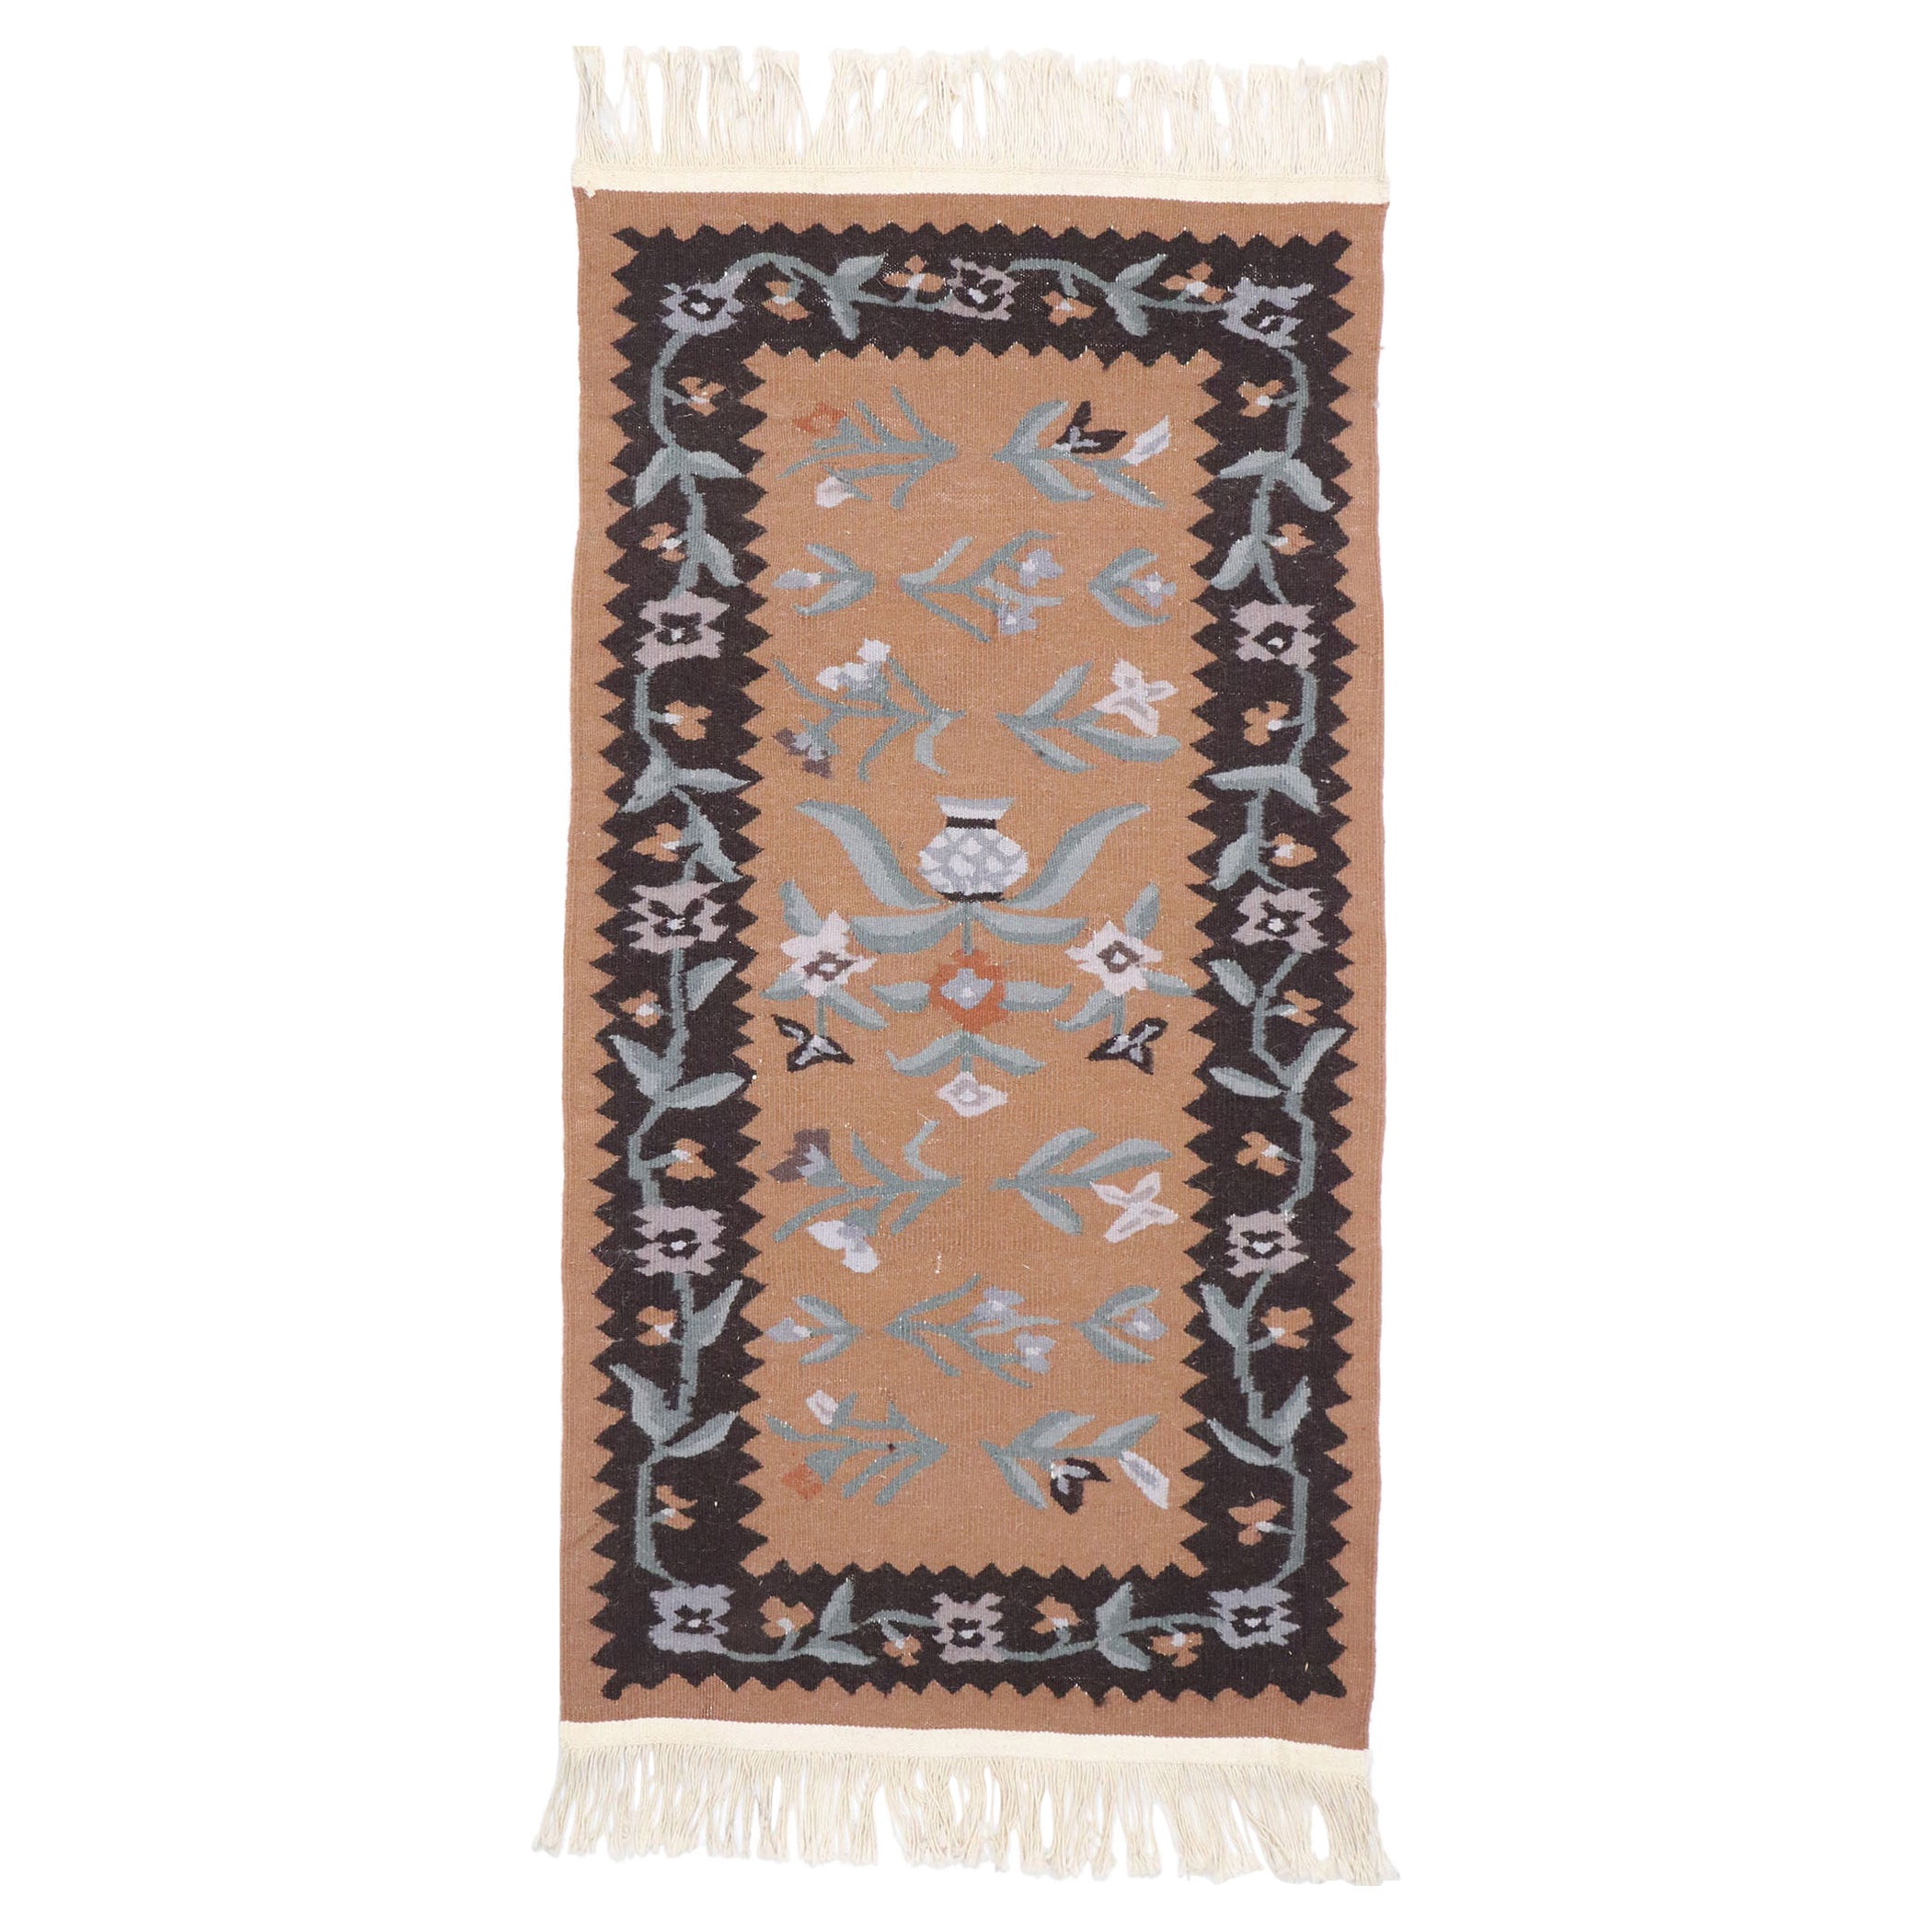 Vintage Persian Shiraz Kilim Rug with Rustic Farmhouse Style For Sale